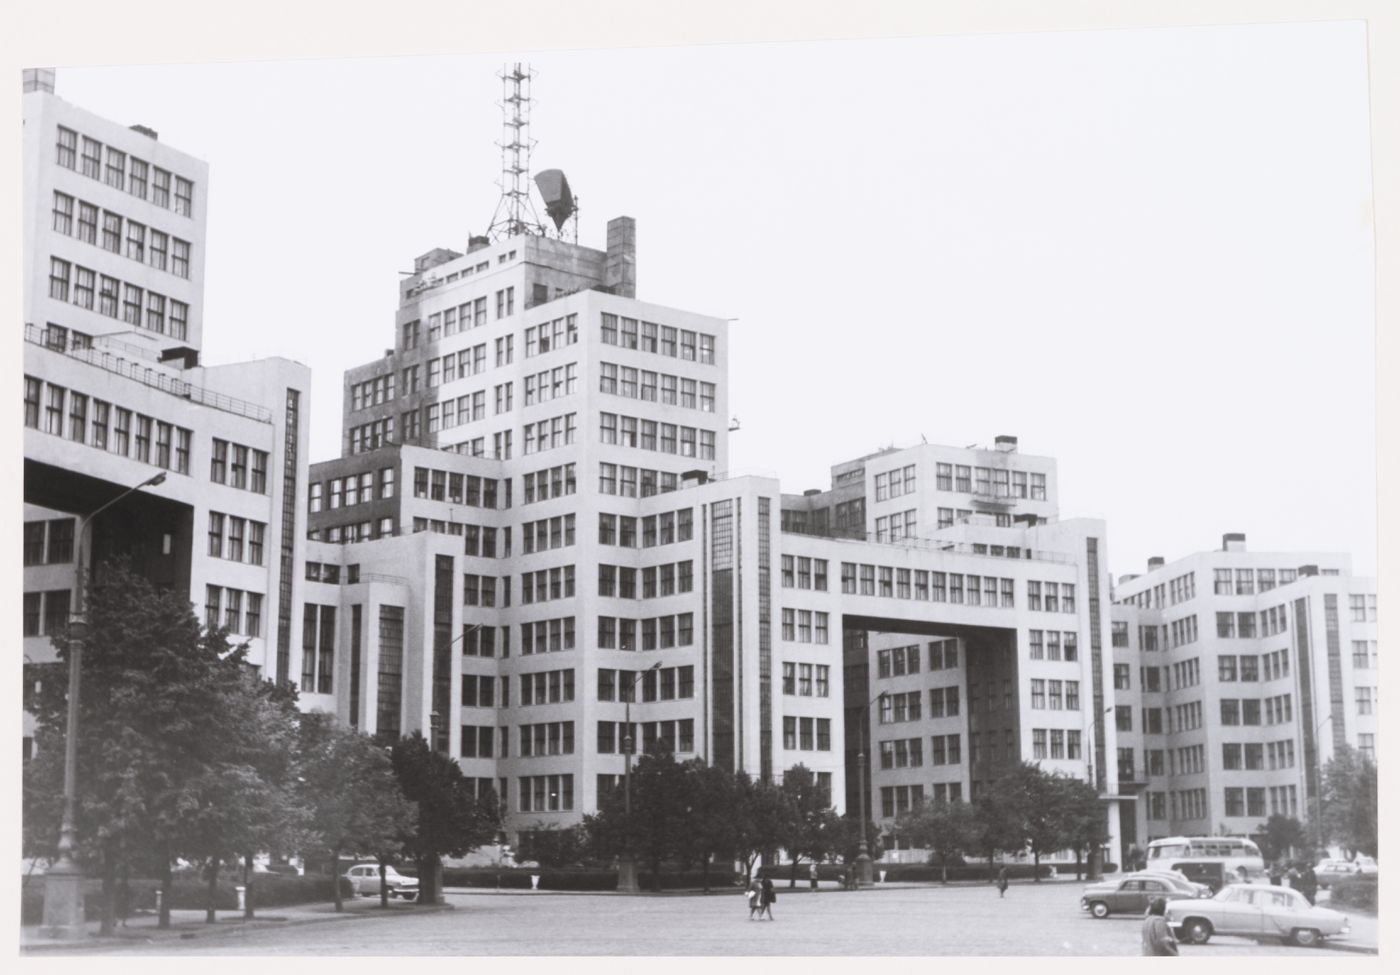 View of Department of Industry and Planning (Gosprom) buildings, Kharkov, Soviet Union (now in Ukraine)